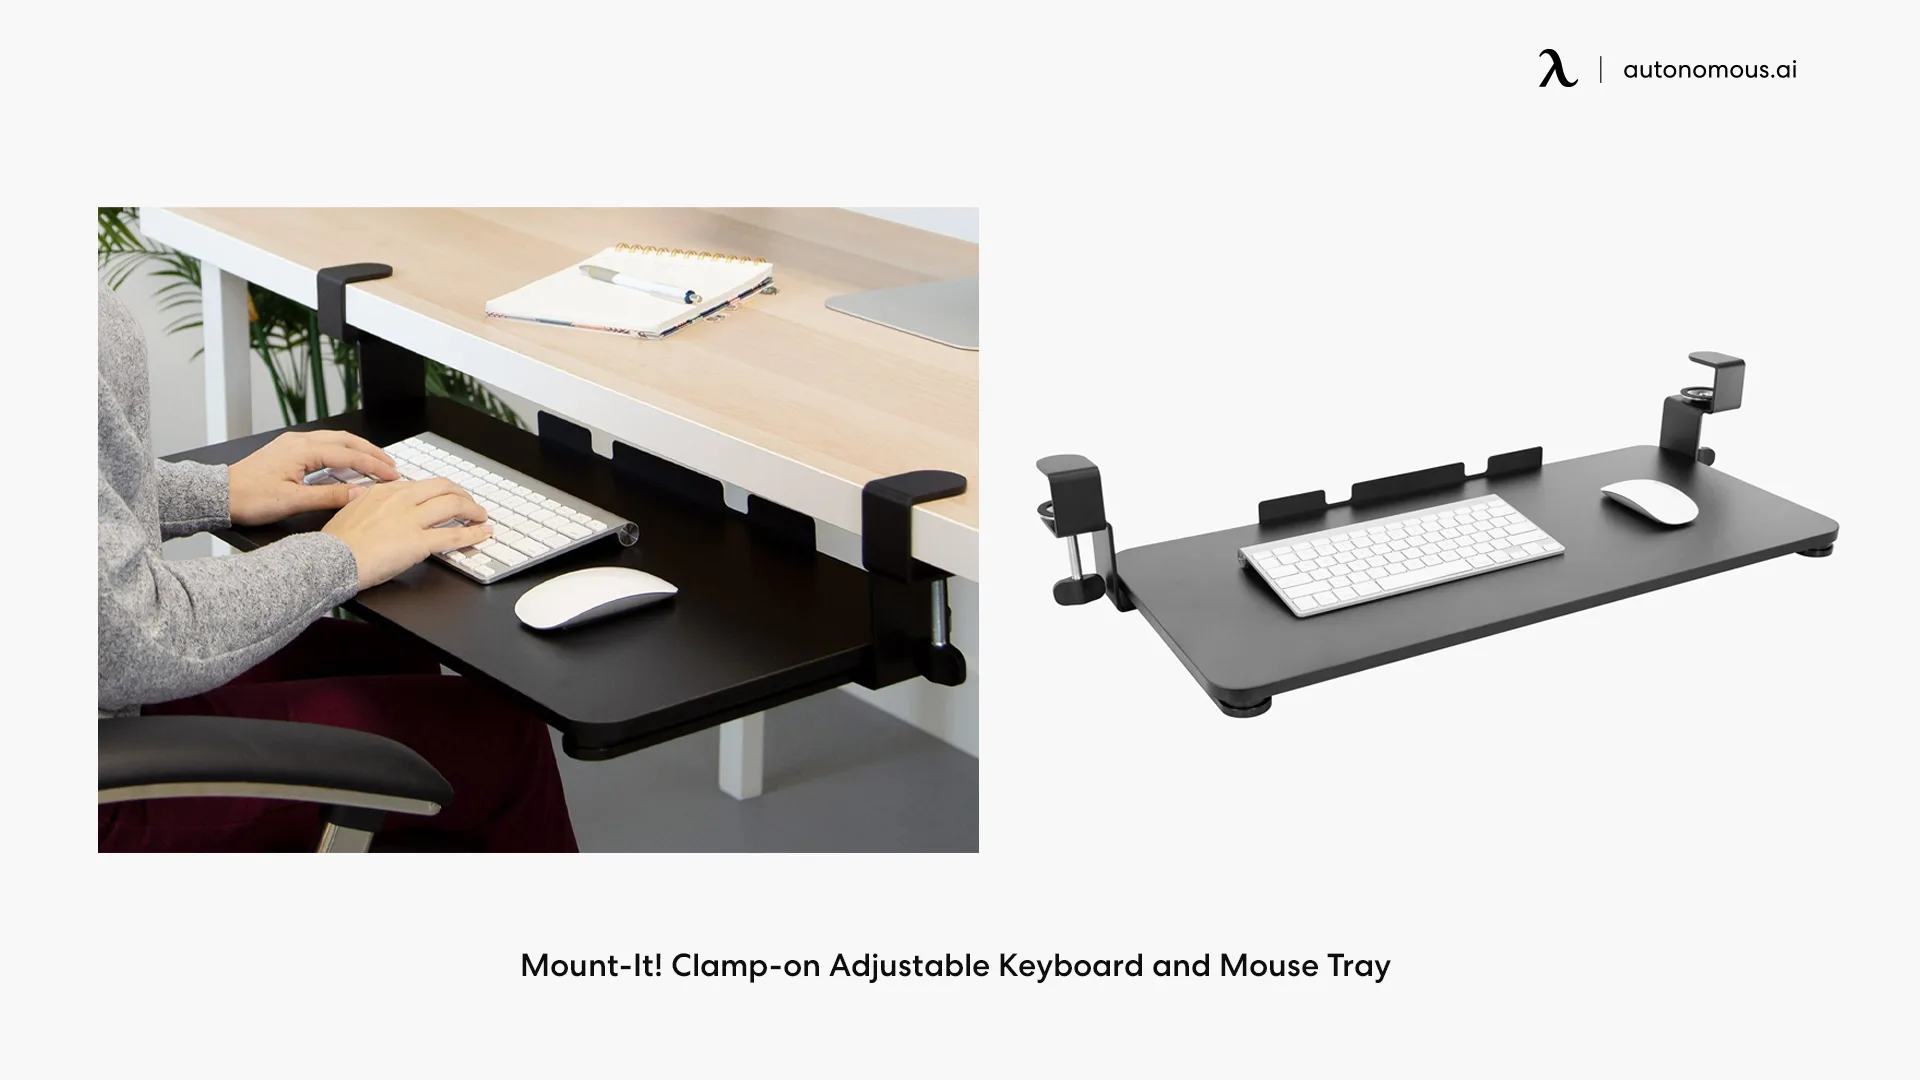 Mount-It! Clamp-on Adjustable Keyboard and Mouse Tray